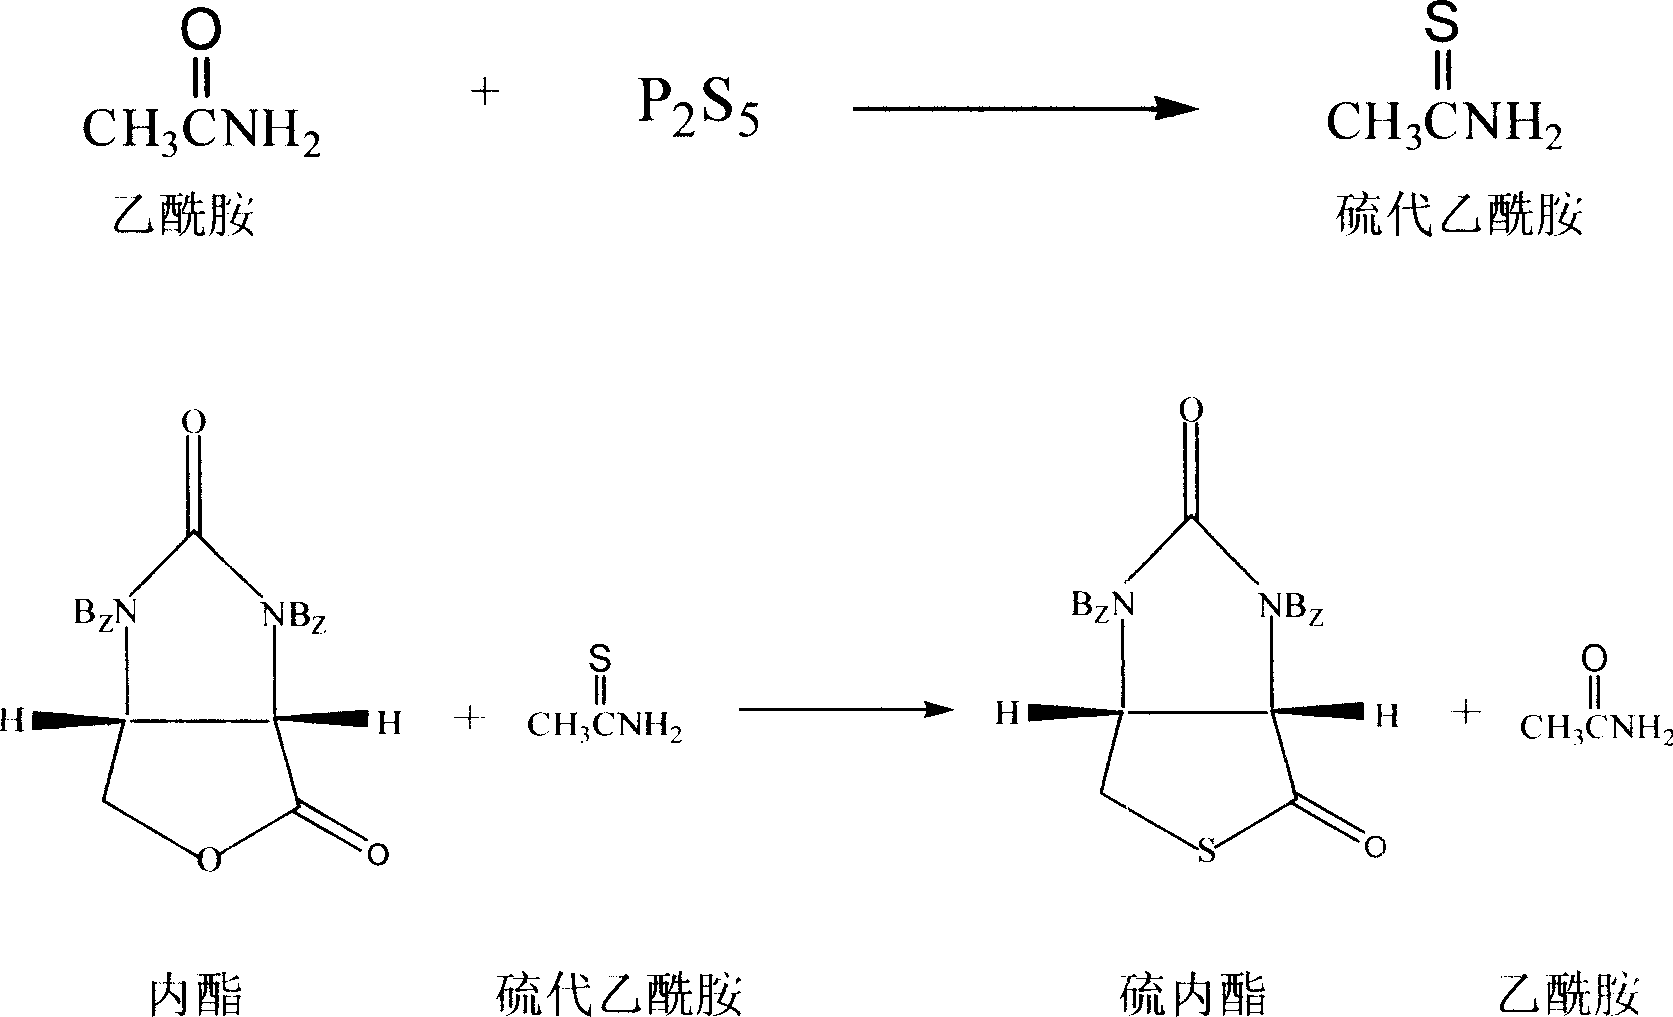 Process for synthesizing thiolactone